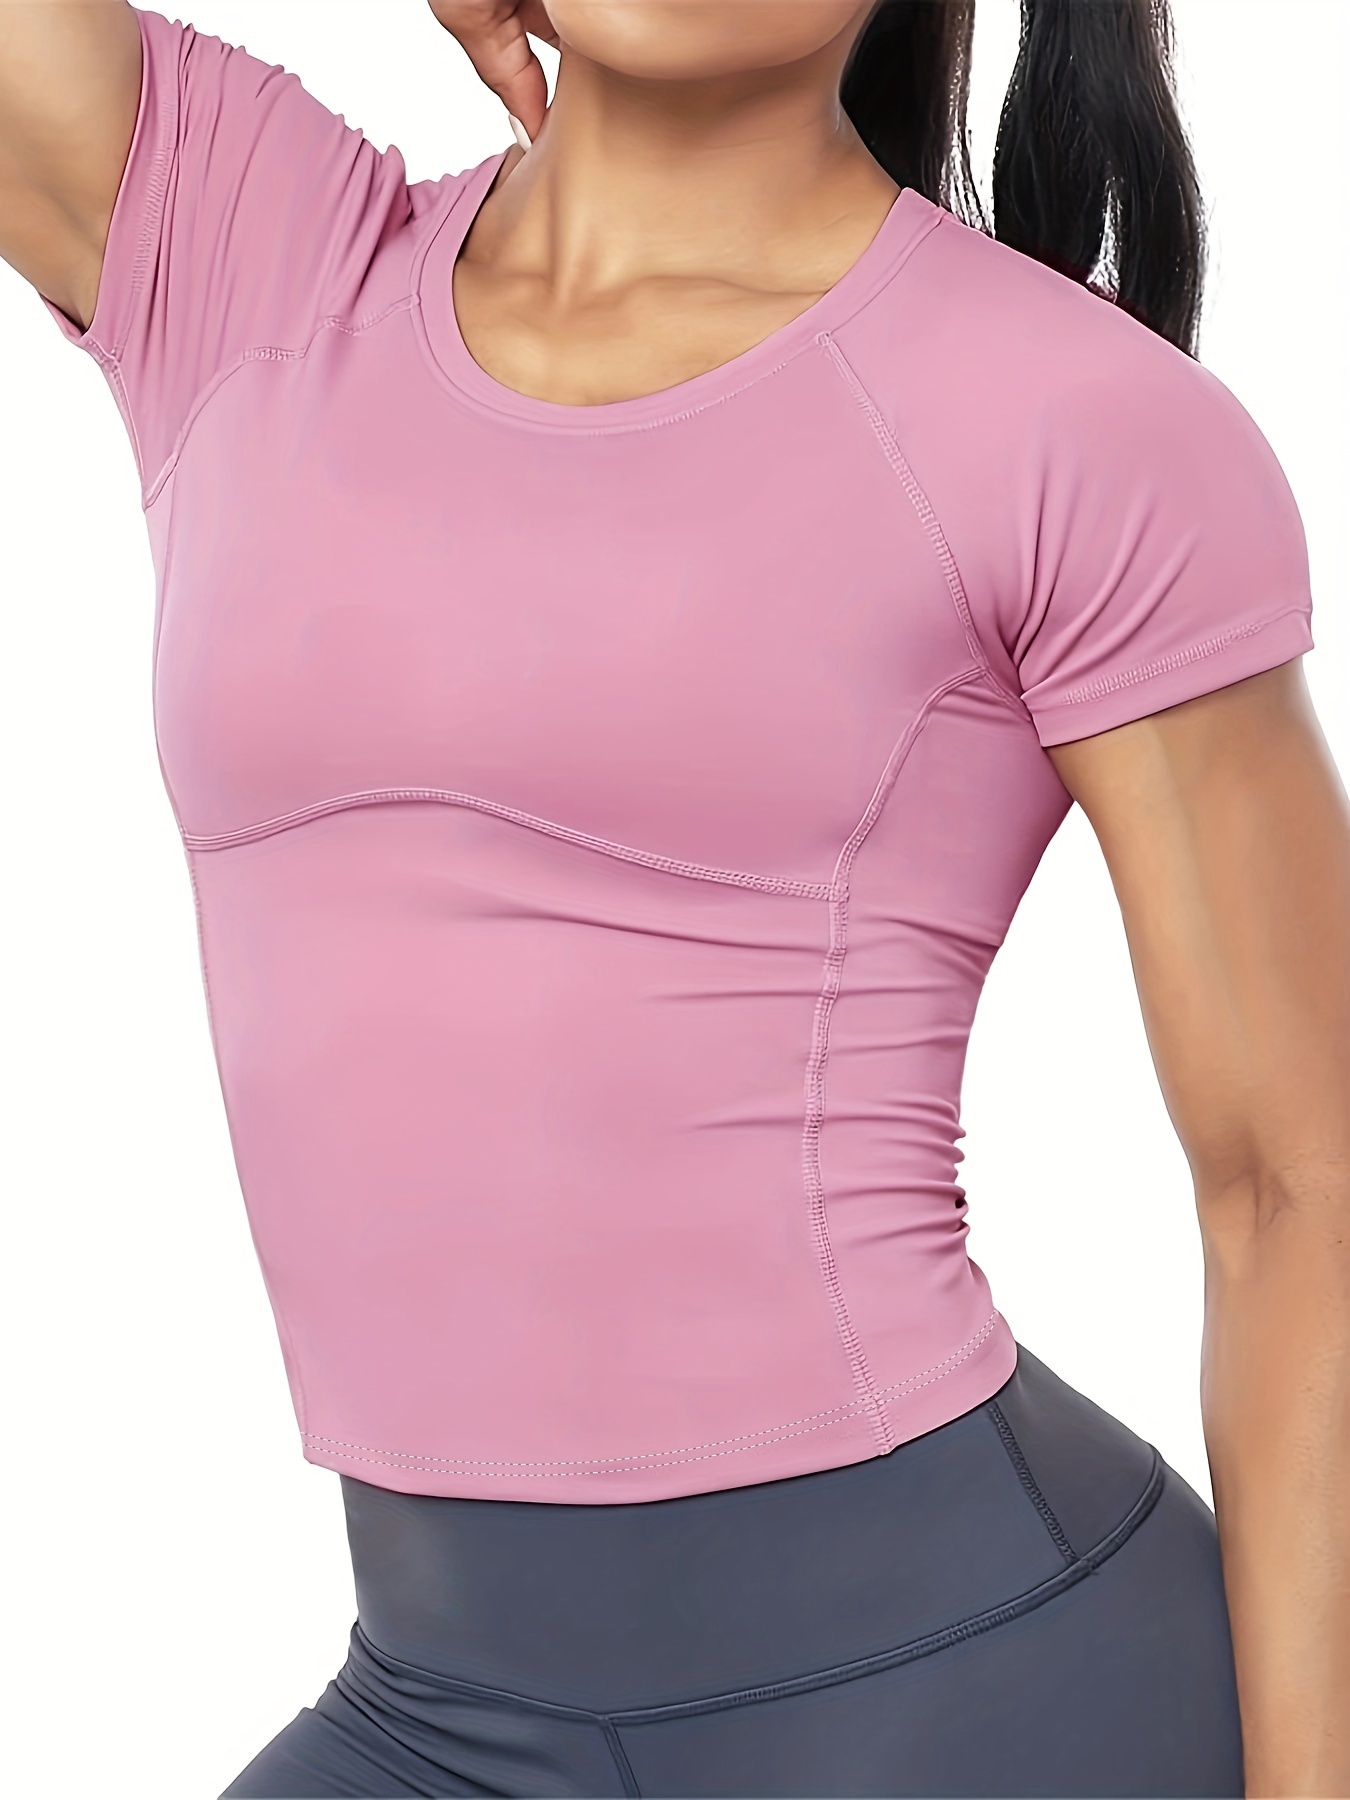 Buy Kidwala Women's T-Shirts, Activewear Round neck & Half Sleeves Top  Workout Gym Yoga Outfit for Women (Small, Pink) Online - Shop on Carrefour  UAE